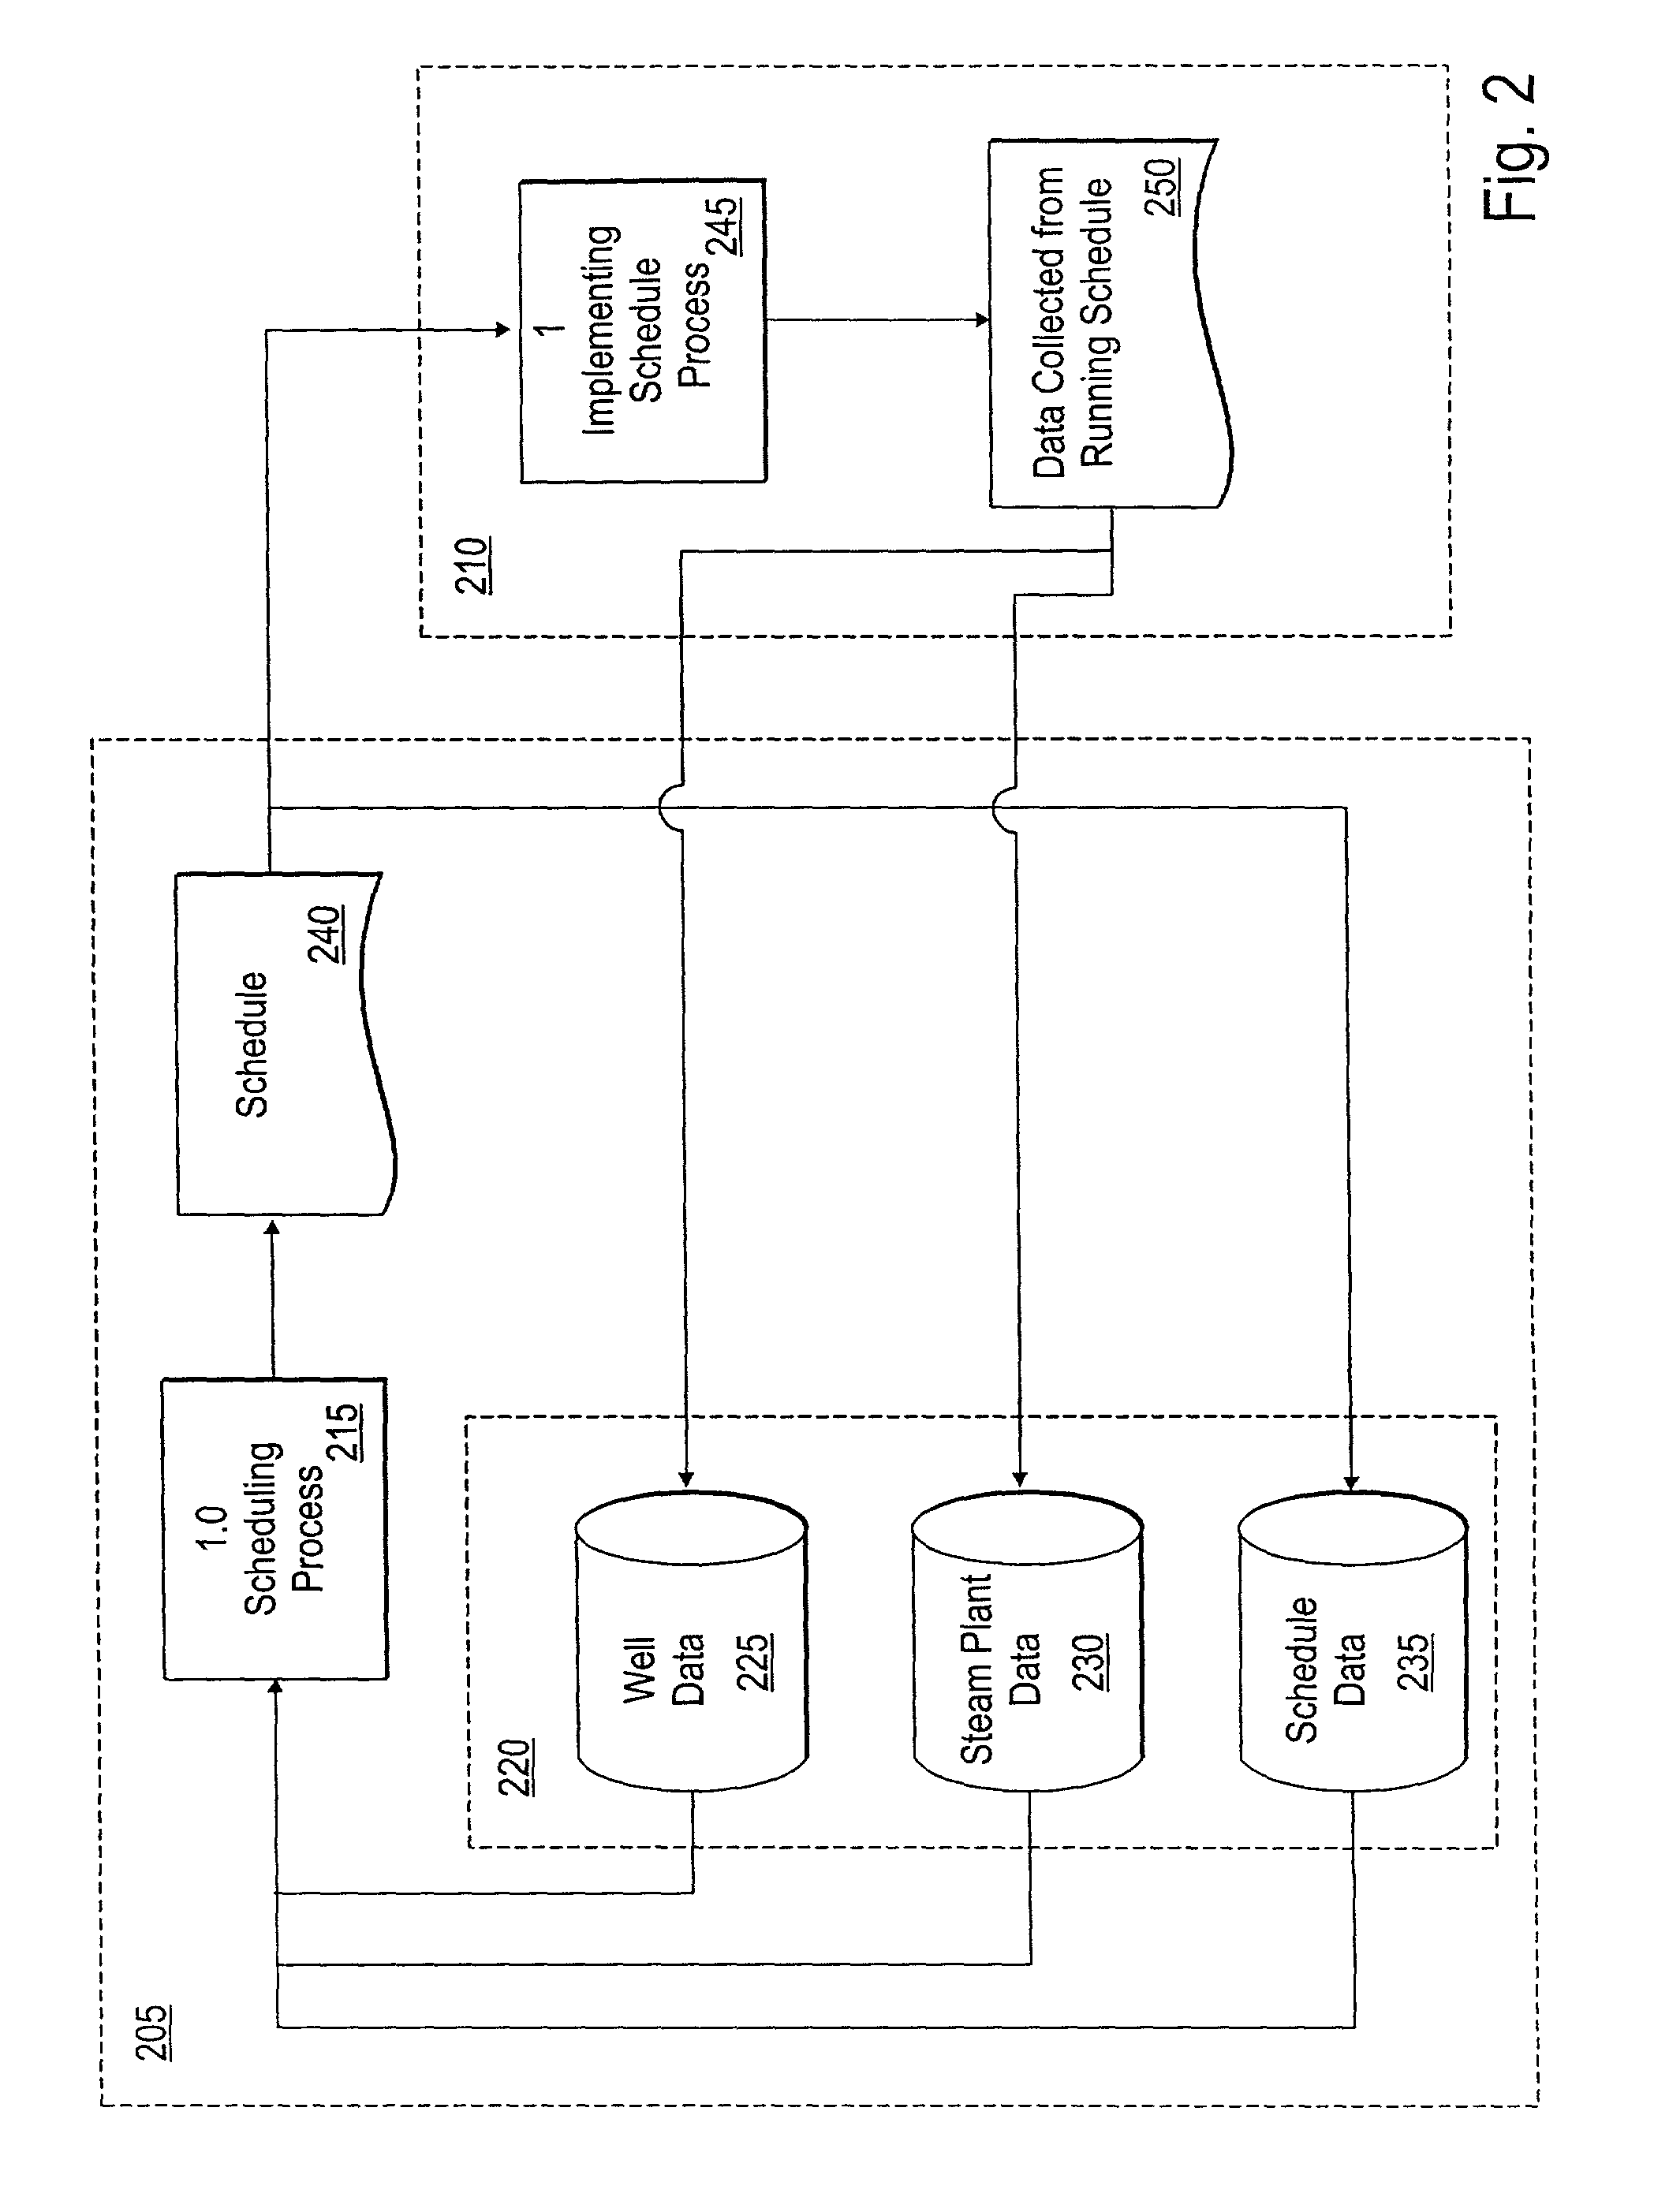 System and method for scheduling cyclic steaming of wells